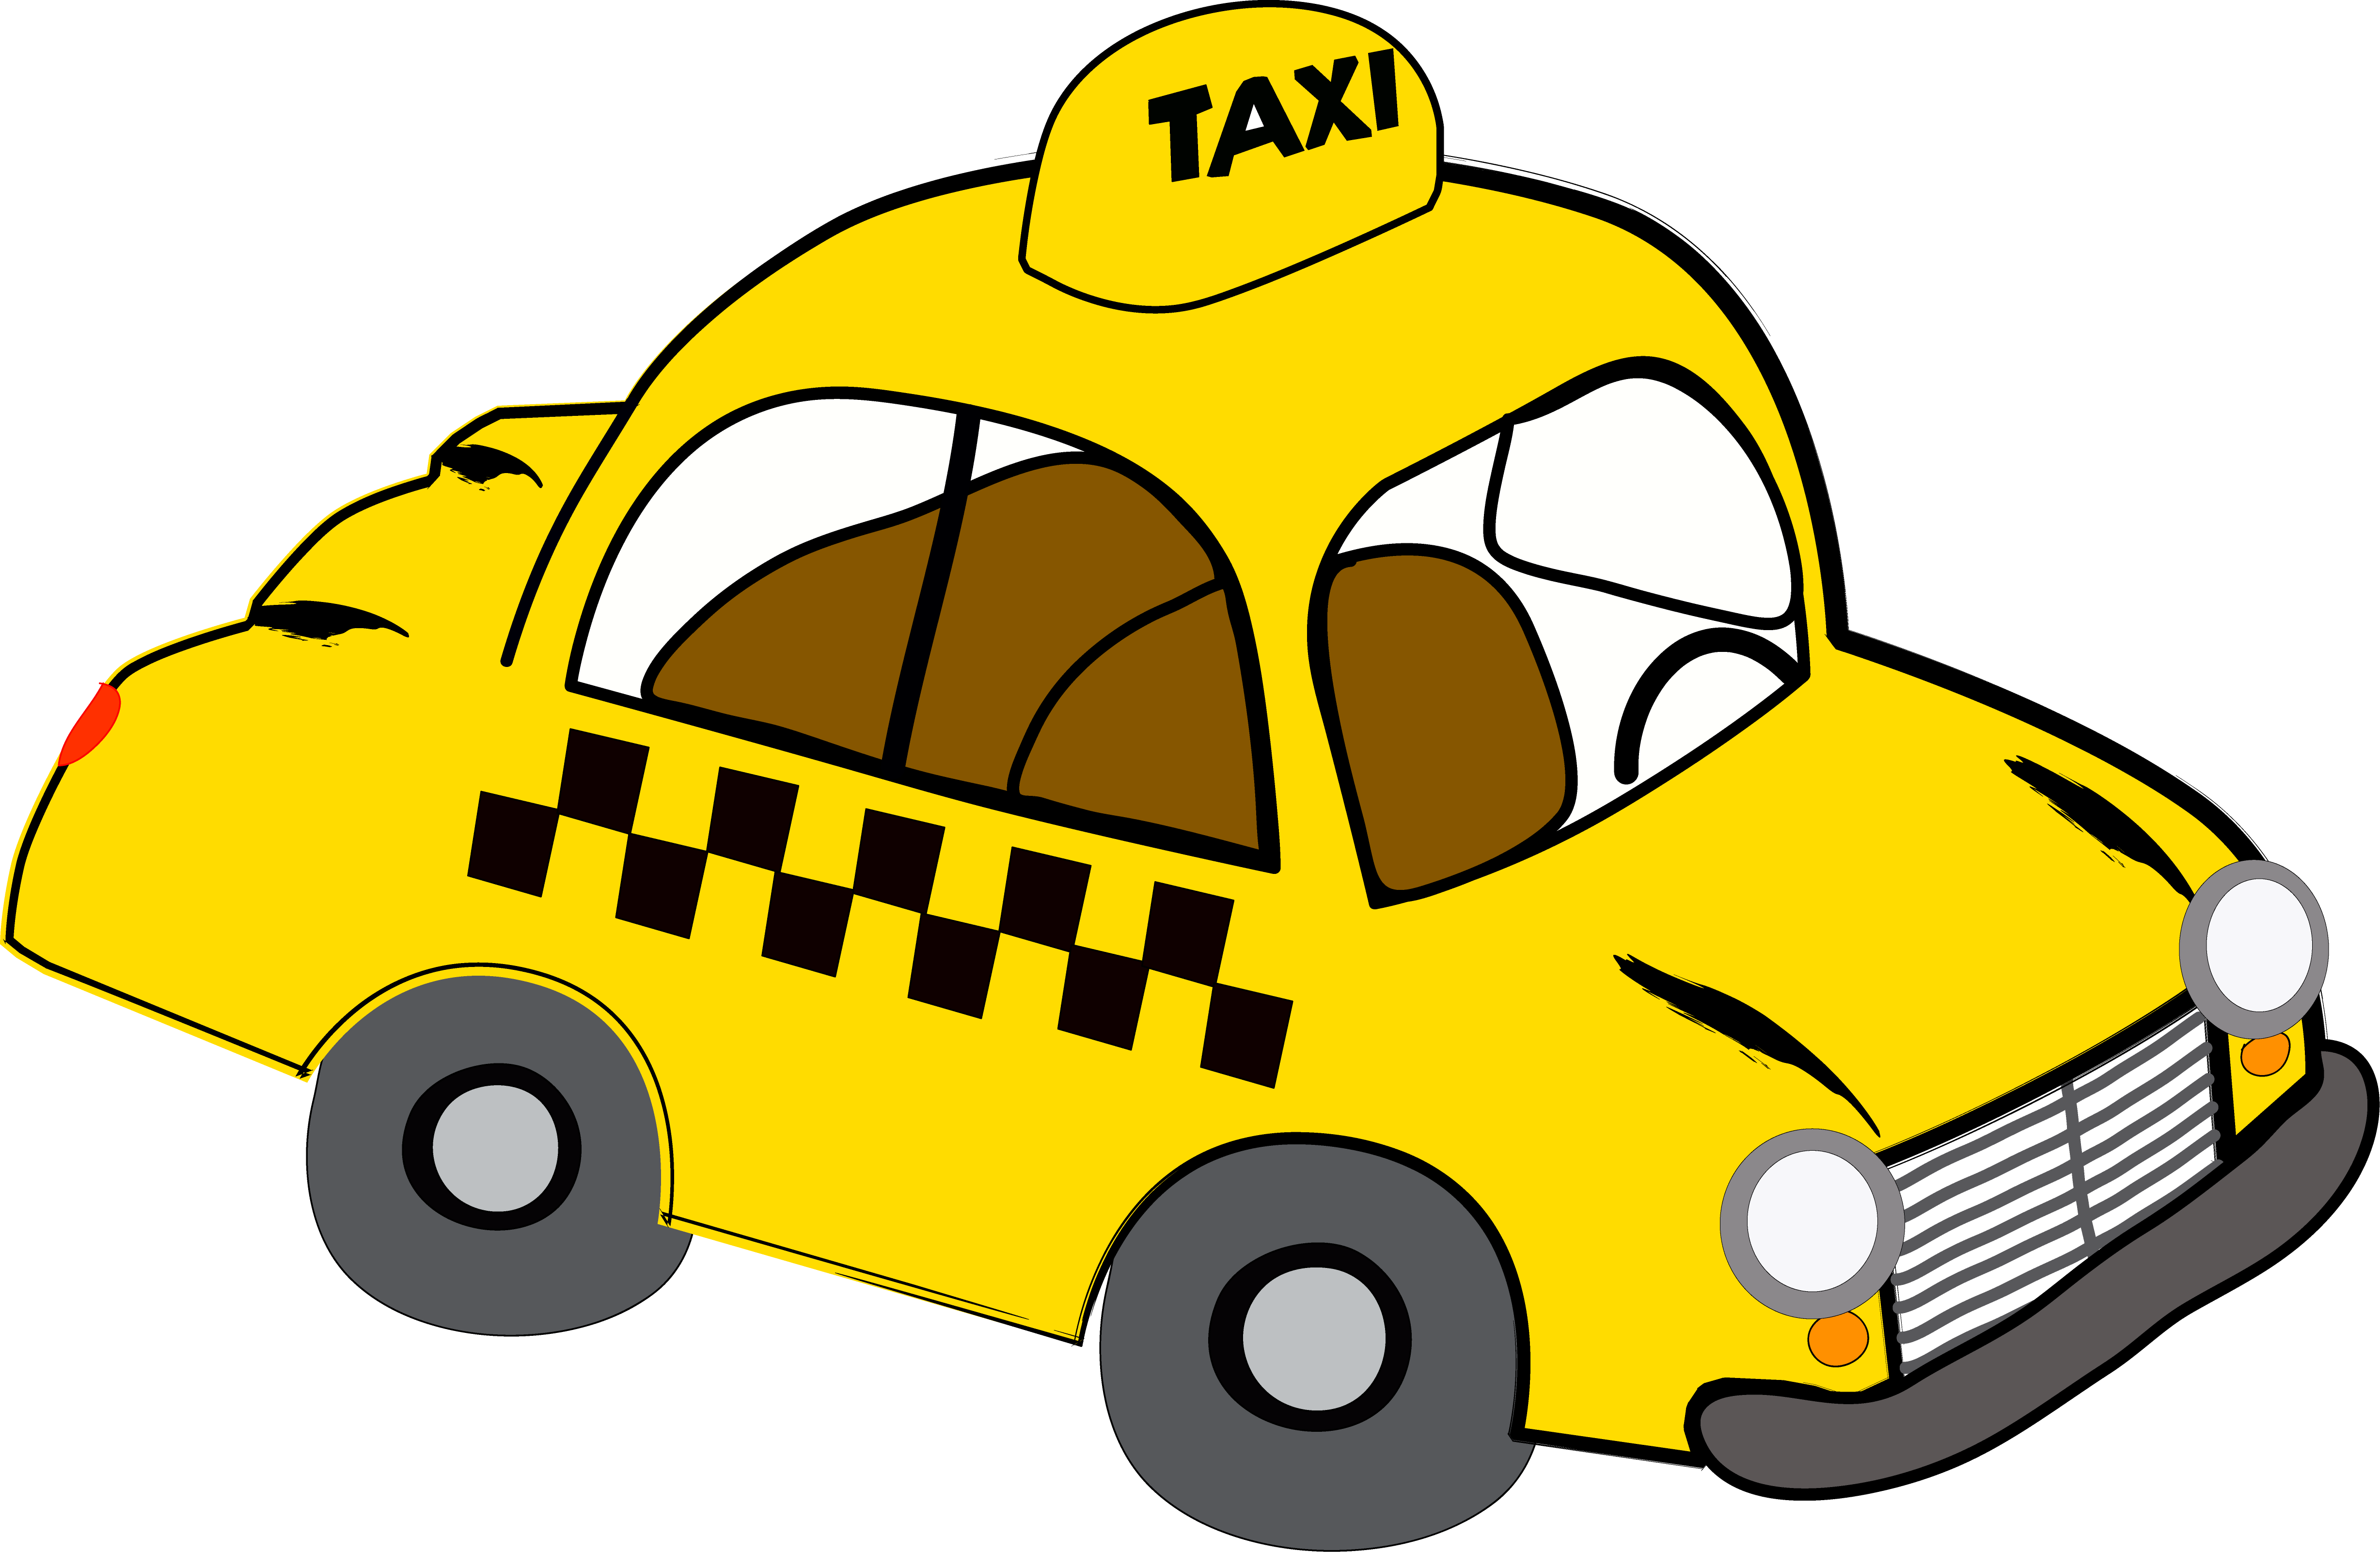 yellow taxi clipart - photo #25